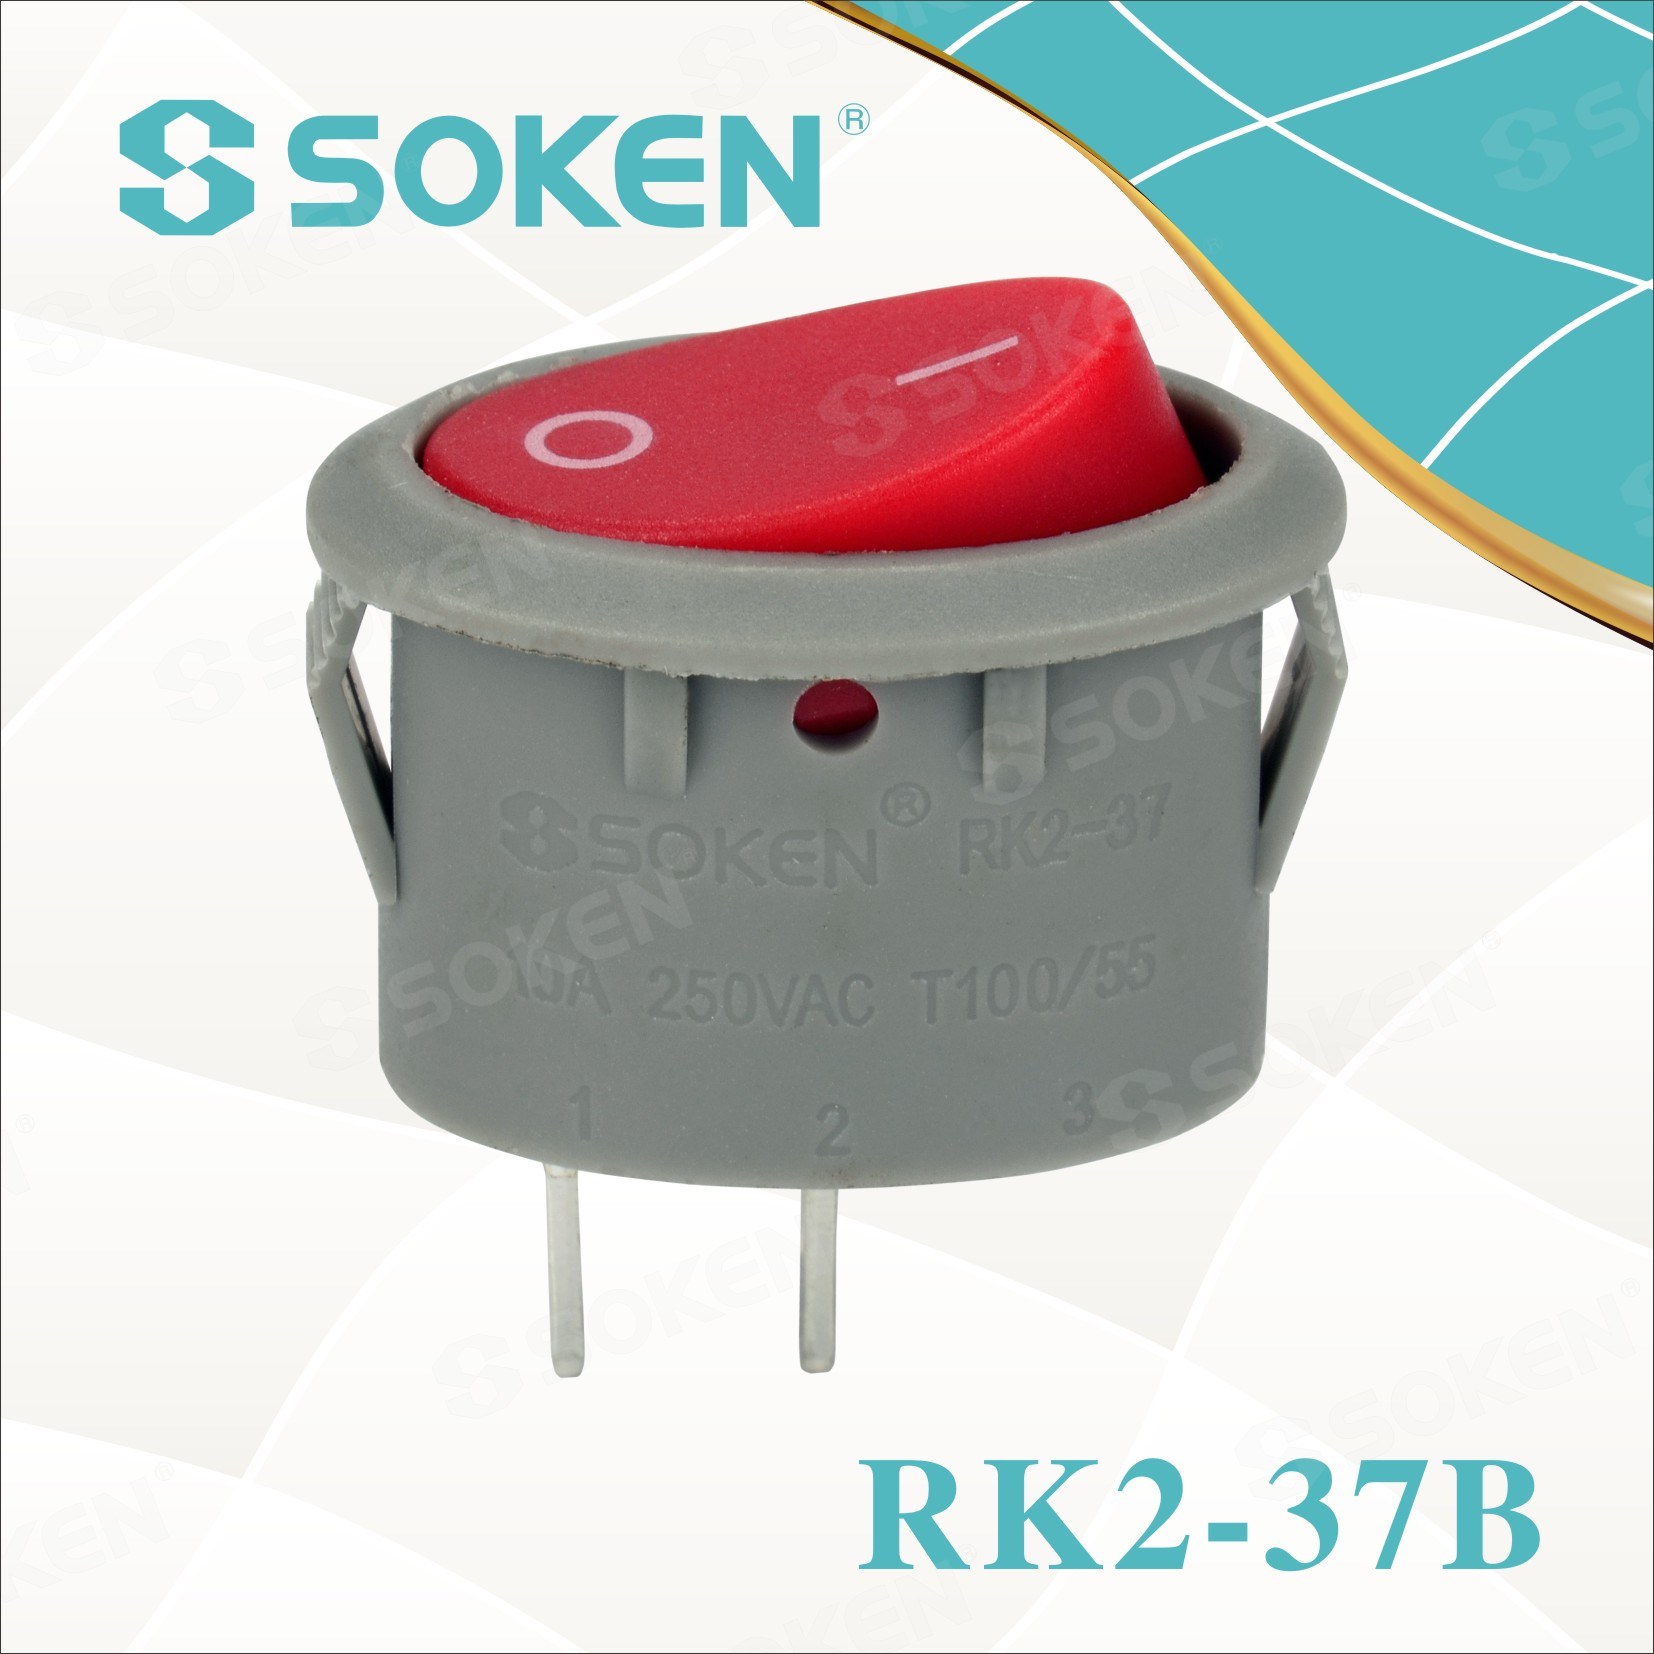 China Gold Supplier for Tactile Switch Led - Rocker Switch – Master Soken Electrical